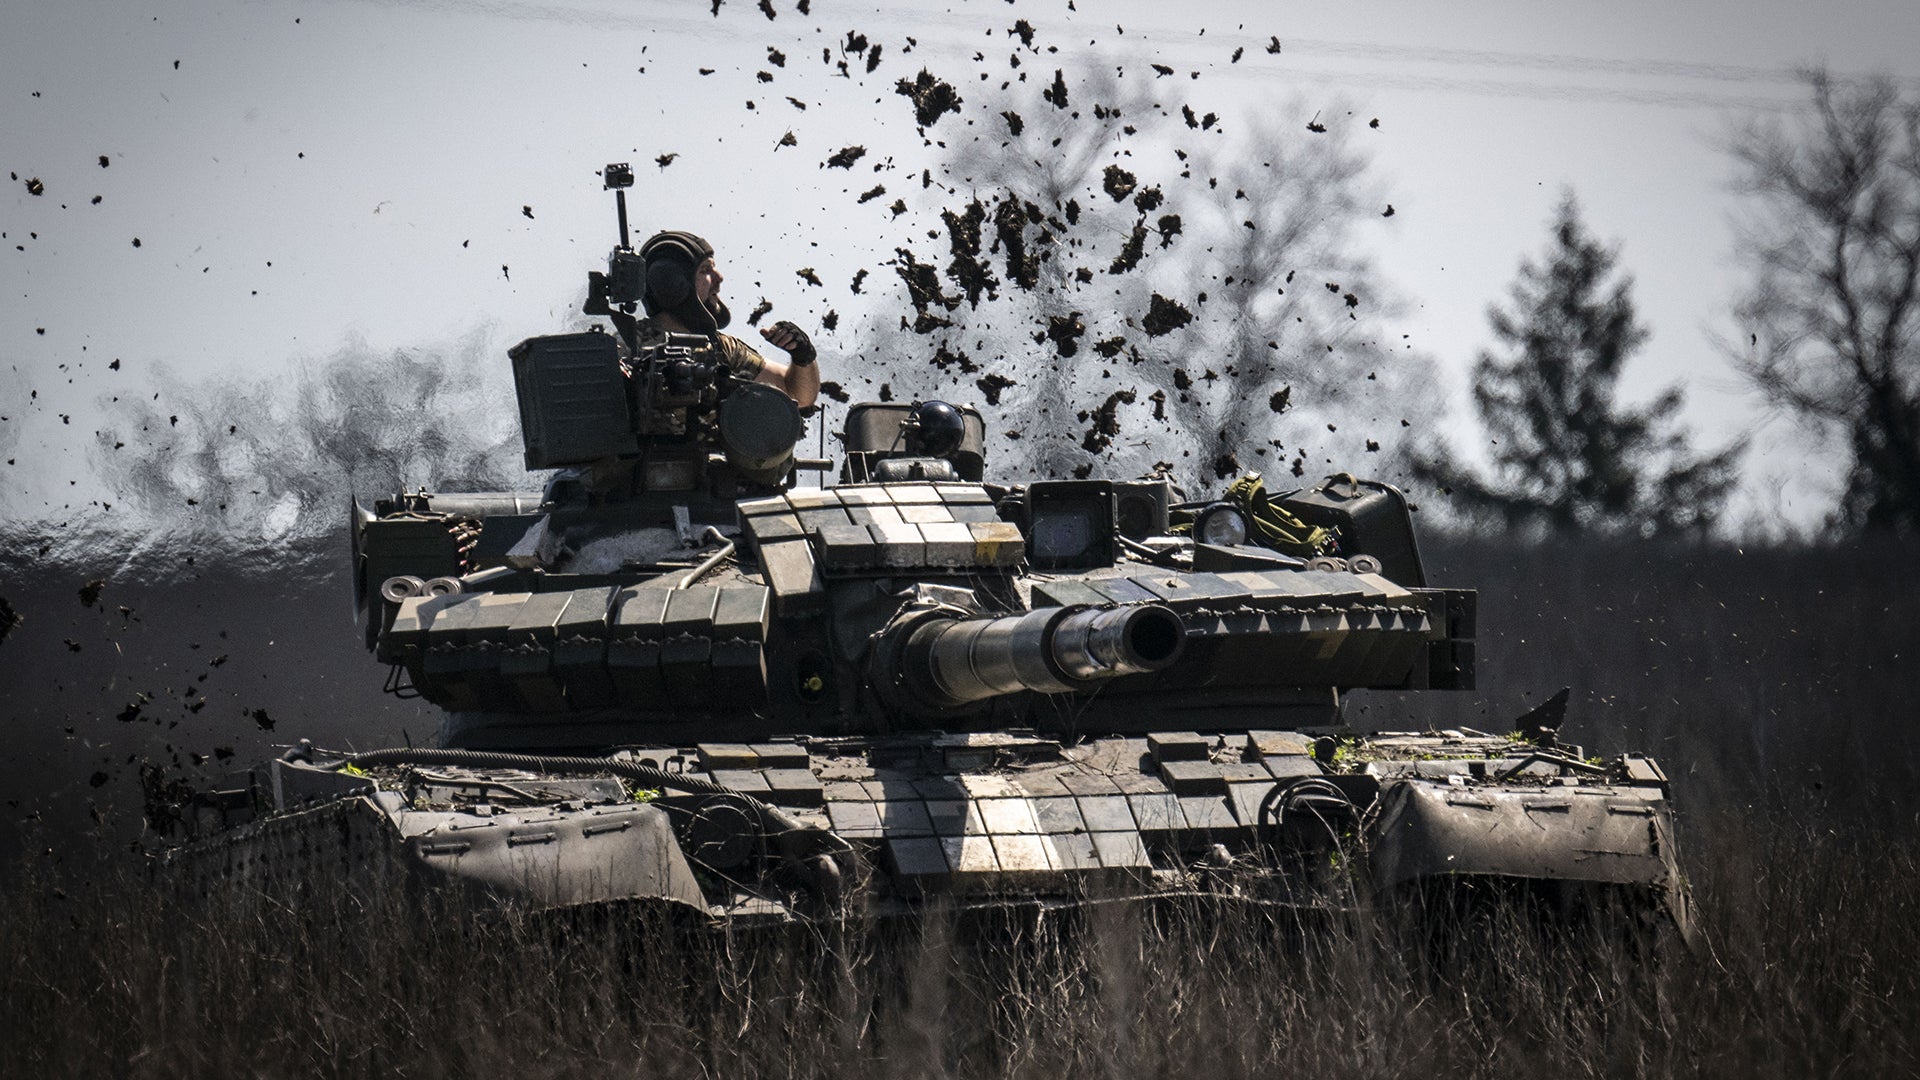 DONETSK OBLAST, UKRAINE - APRIL 26: Ukrainian crews operate and fire the tanks on ranges in tough terrain conditions as the Russia-Ukraine war continues in Donetsk Oblast, Ukraine on April 26, 2023. (Photo by Muhammed Enes Yildirim/Anadolu Agency via Getty Images)